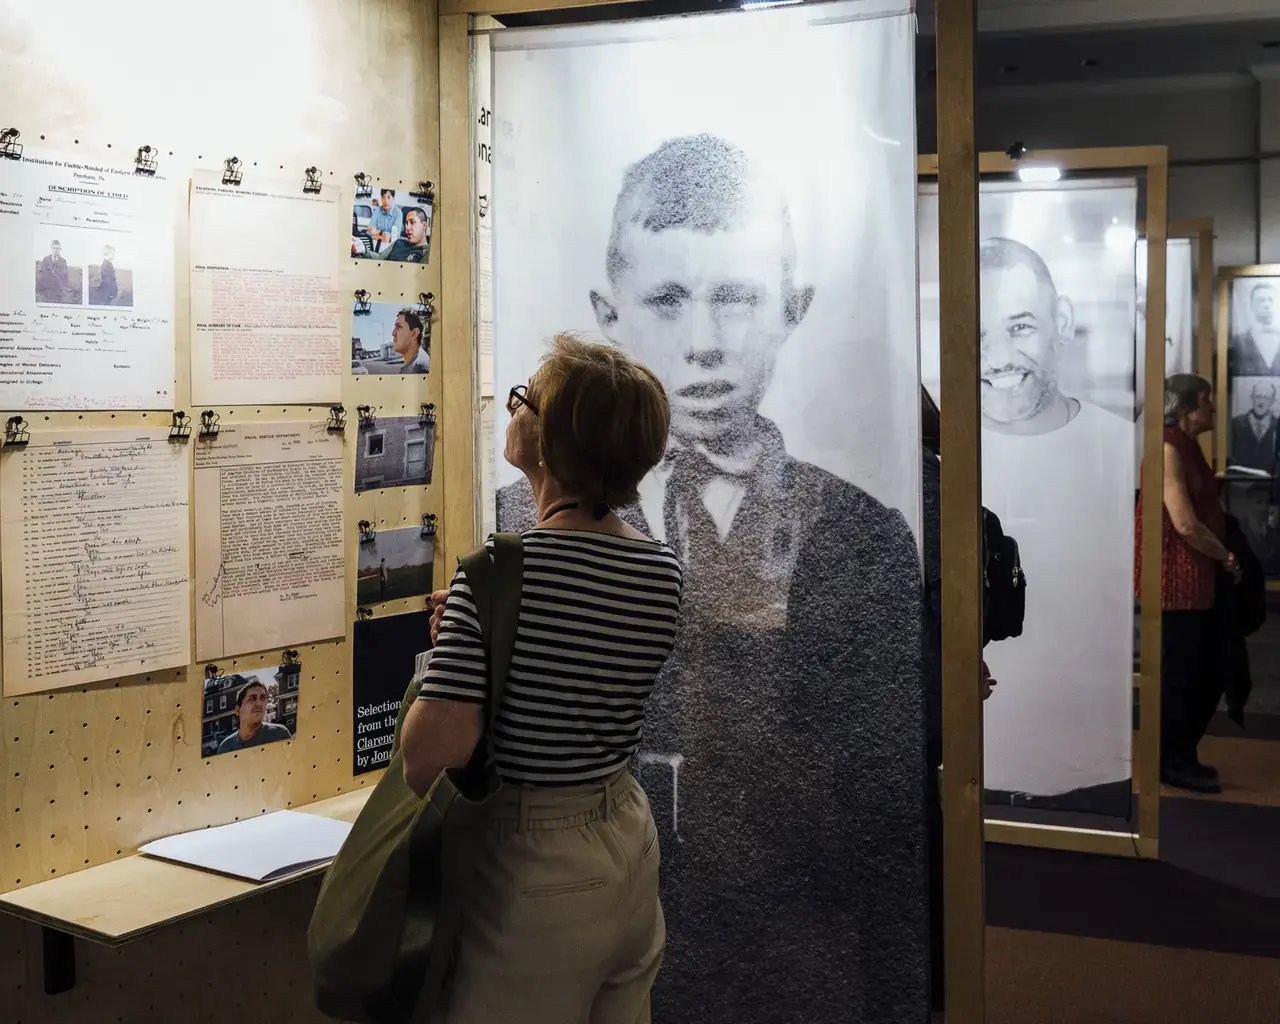 A middle-aged white woman with short red hair stands in front of pegboard display panel, with an adjacent archival portrait of a young man wearing a suit and tie. She is reading the material displayed, which includes archival documents and images, modern day photos and directional text. A Braille book sits on a wooden shelf attached to the display panel.